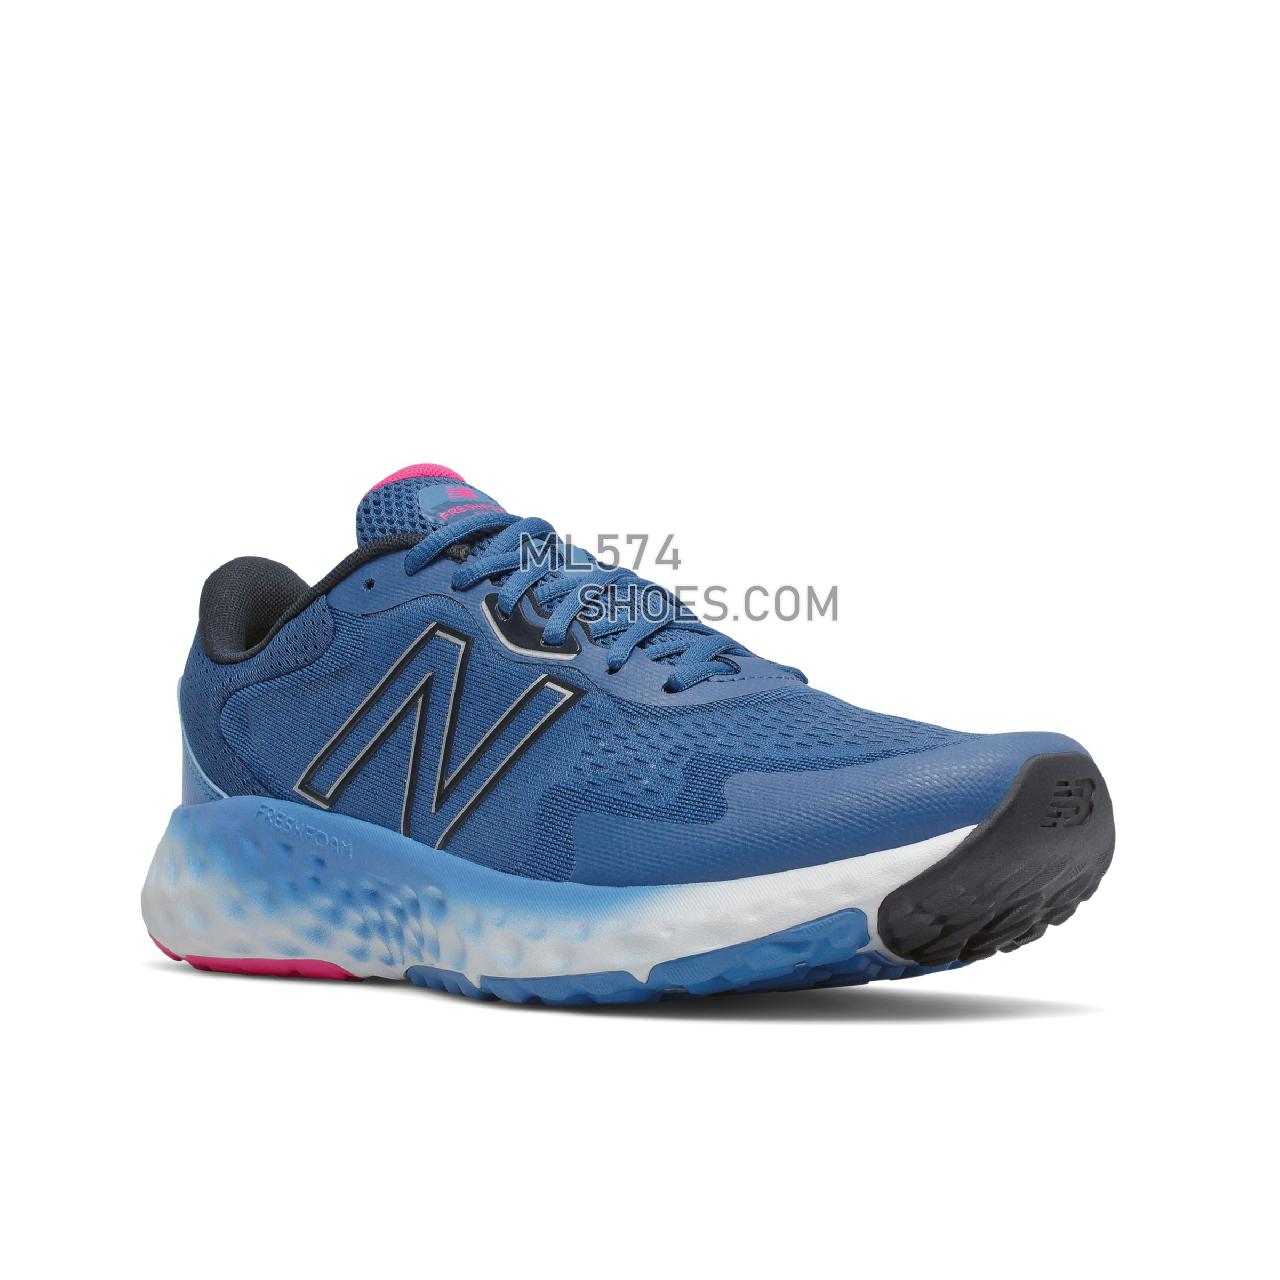 New Balance MEVOZV1 - Men's Classic Sneakers - Oxygen Blue with Pink - MEVOZCB1